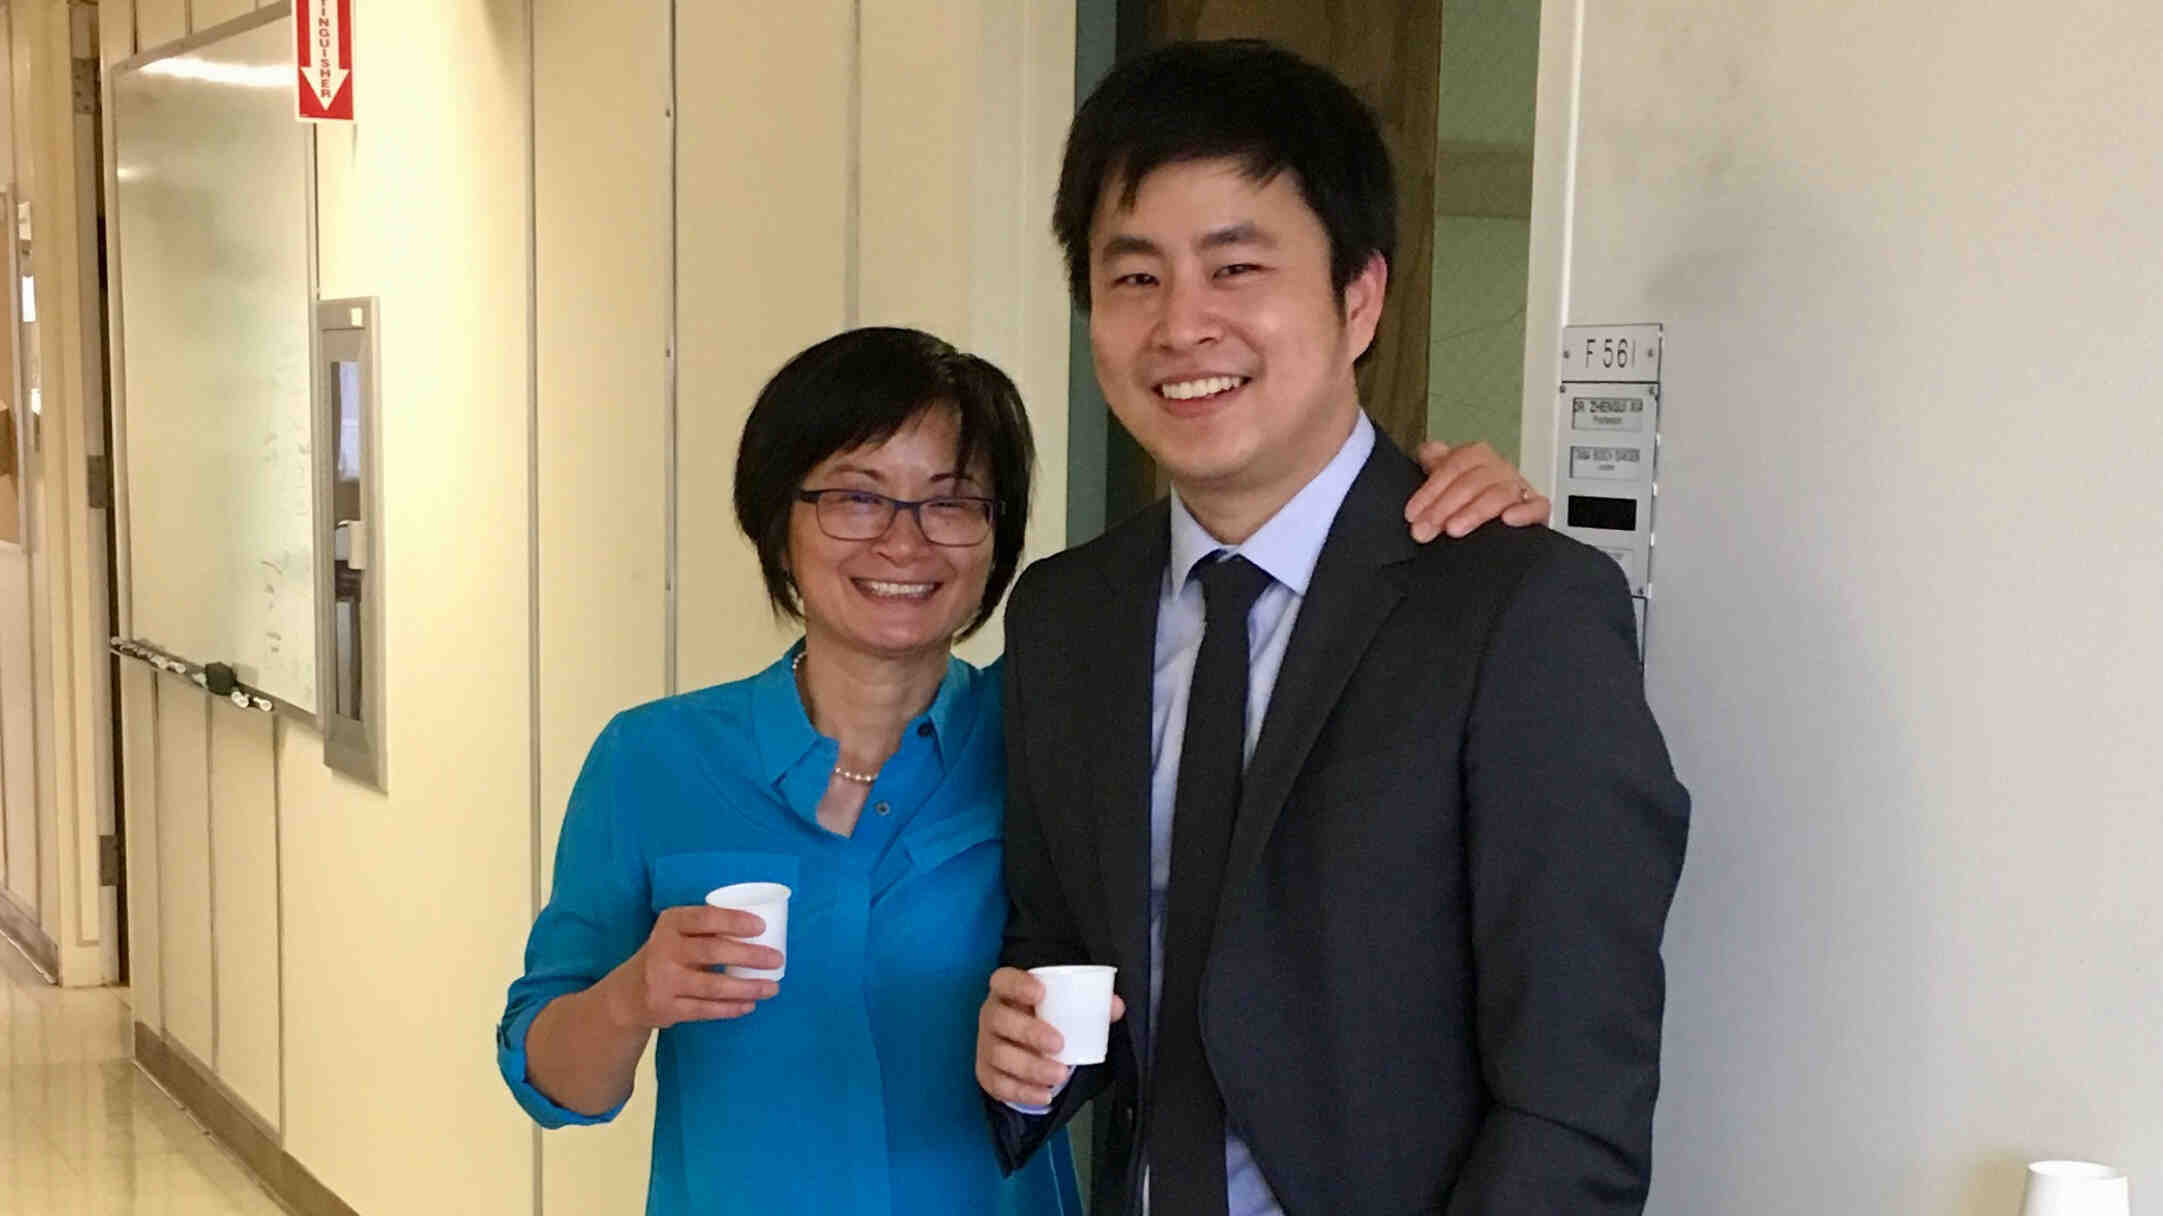 Zhengui Xia and Hao Wang pose together after his dissertation defense